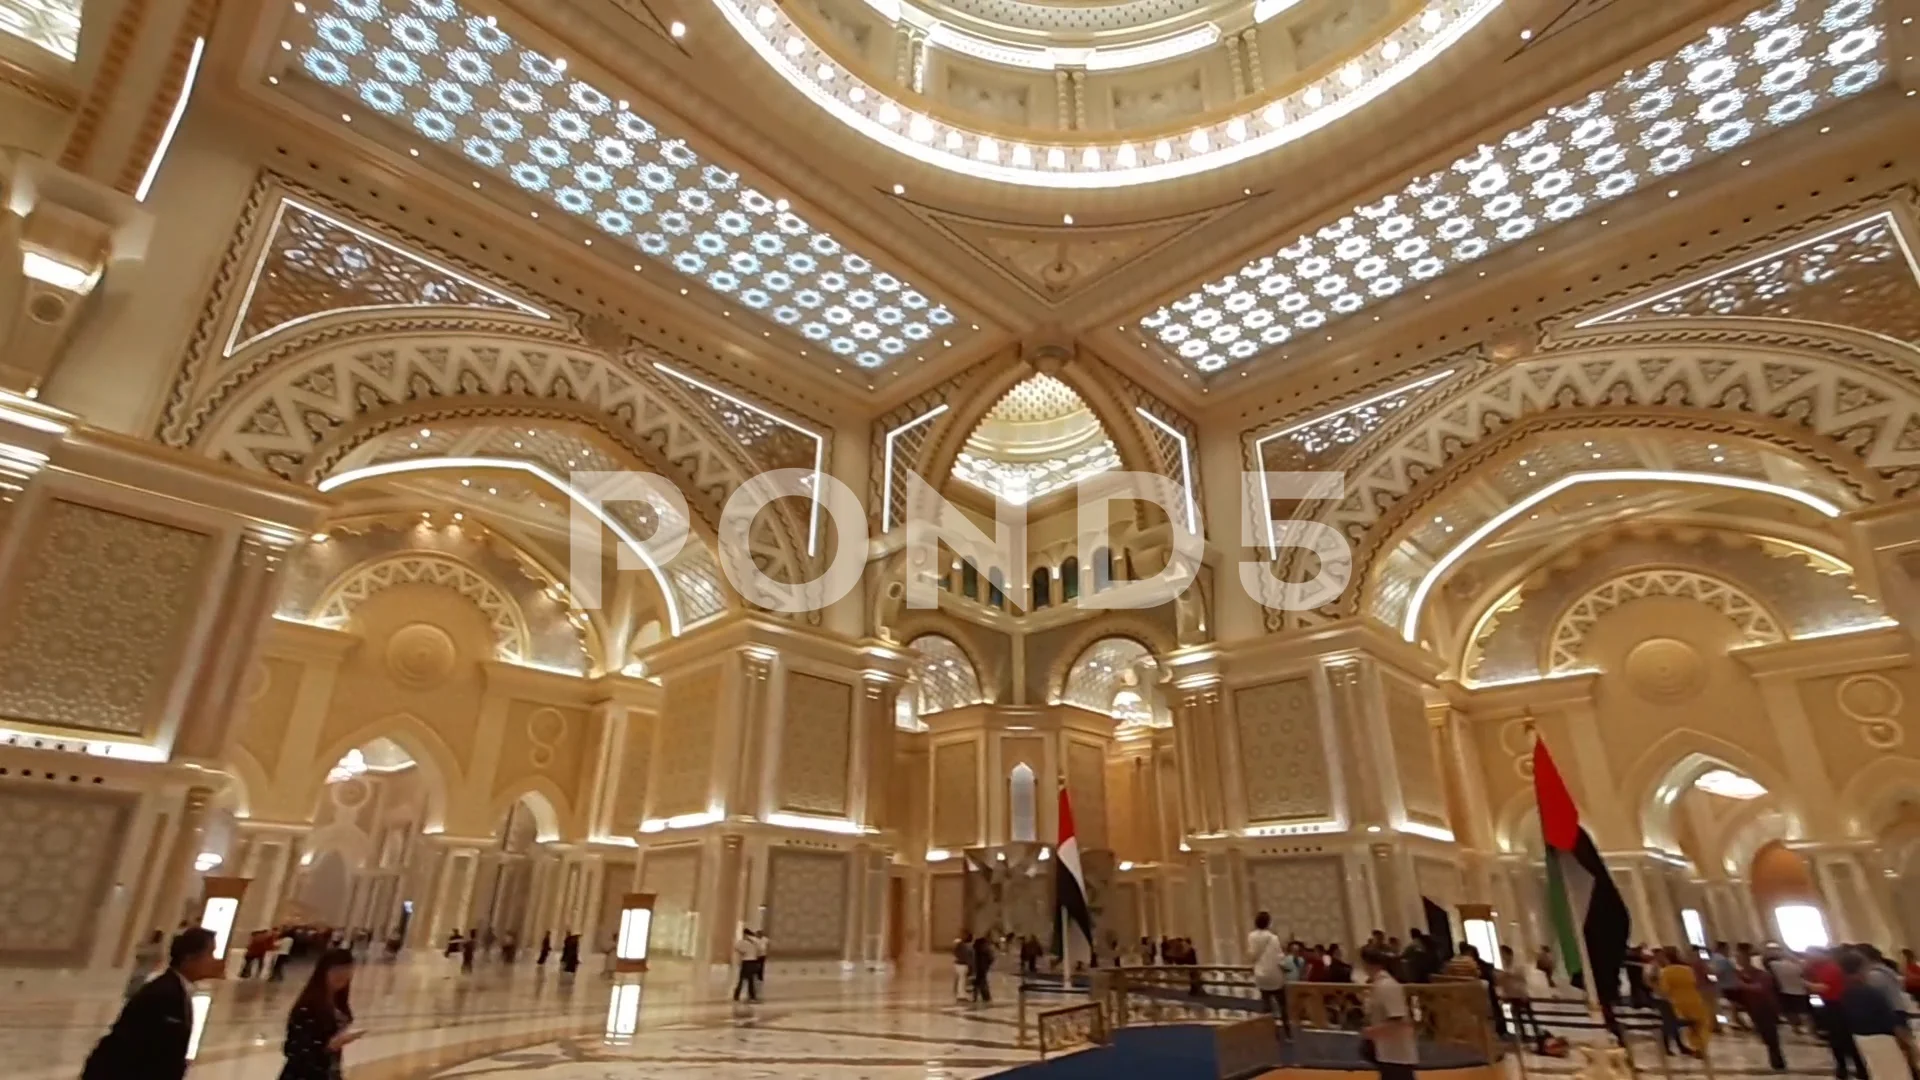 Discover More Than 125 Abu Dhabi Presidential Palace Interior Vn 0173